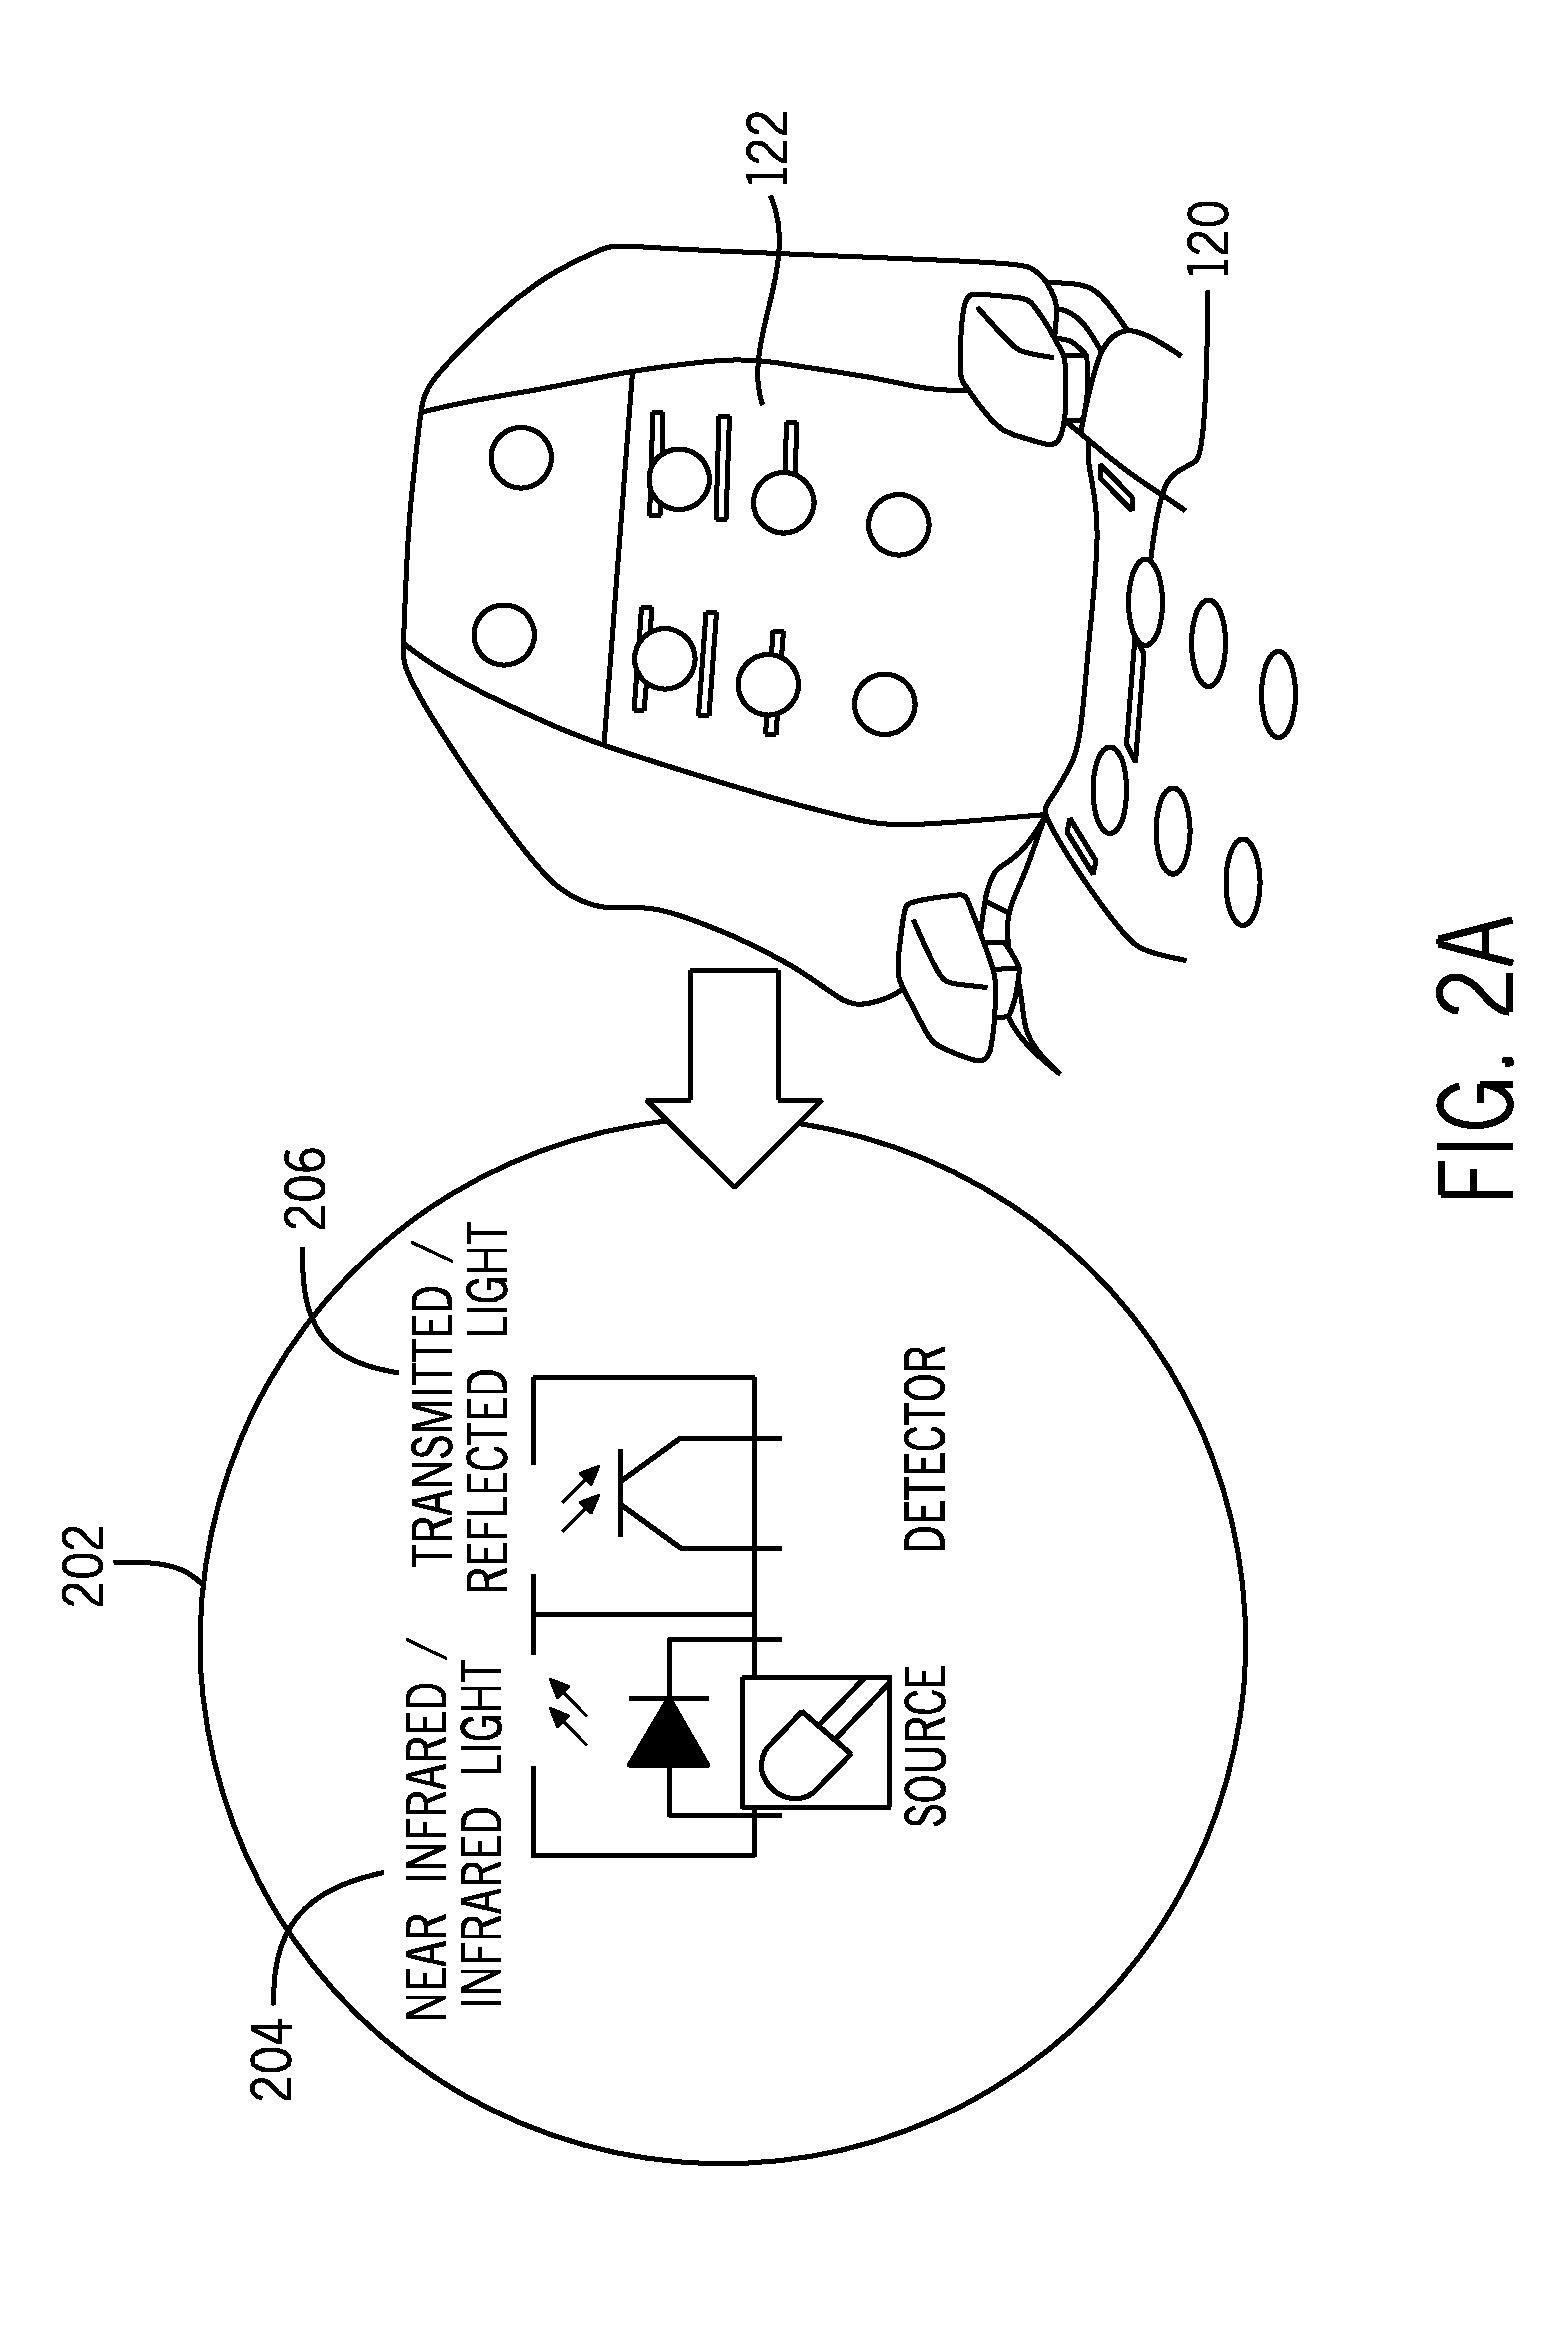 System and method for capturing and decontaminating photoplethysmopgraphy (PPG) signals in a vehicle